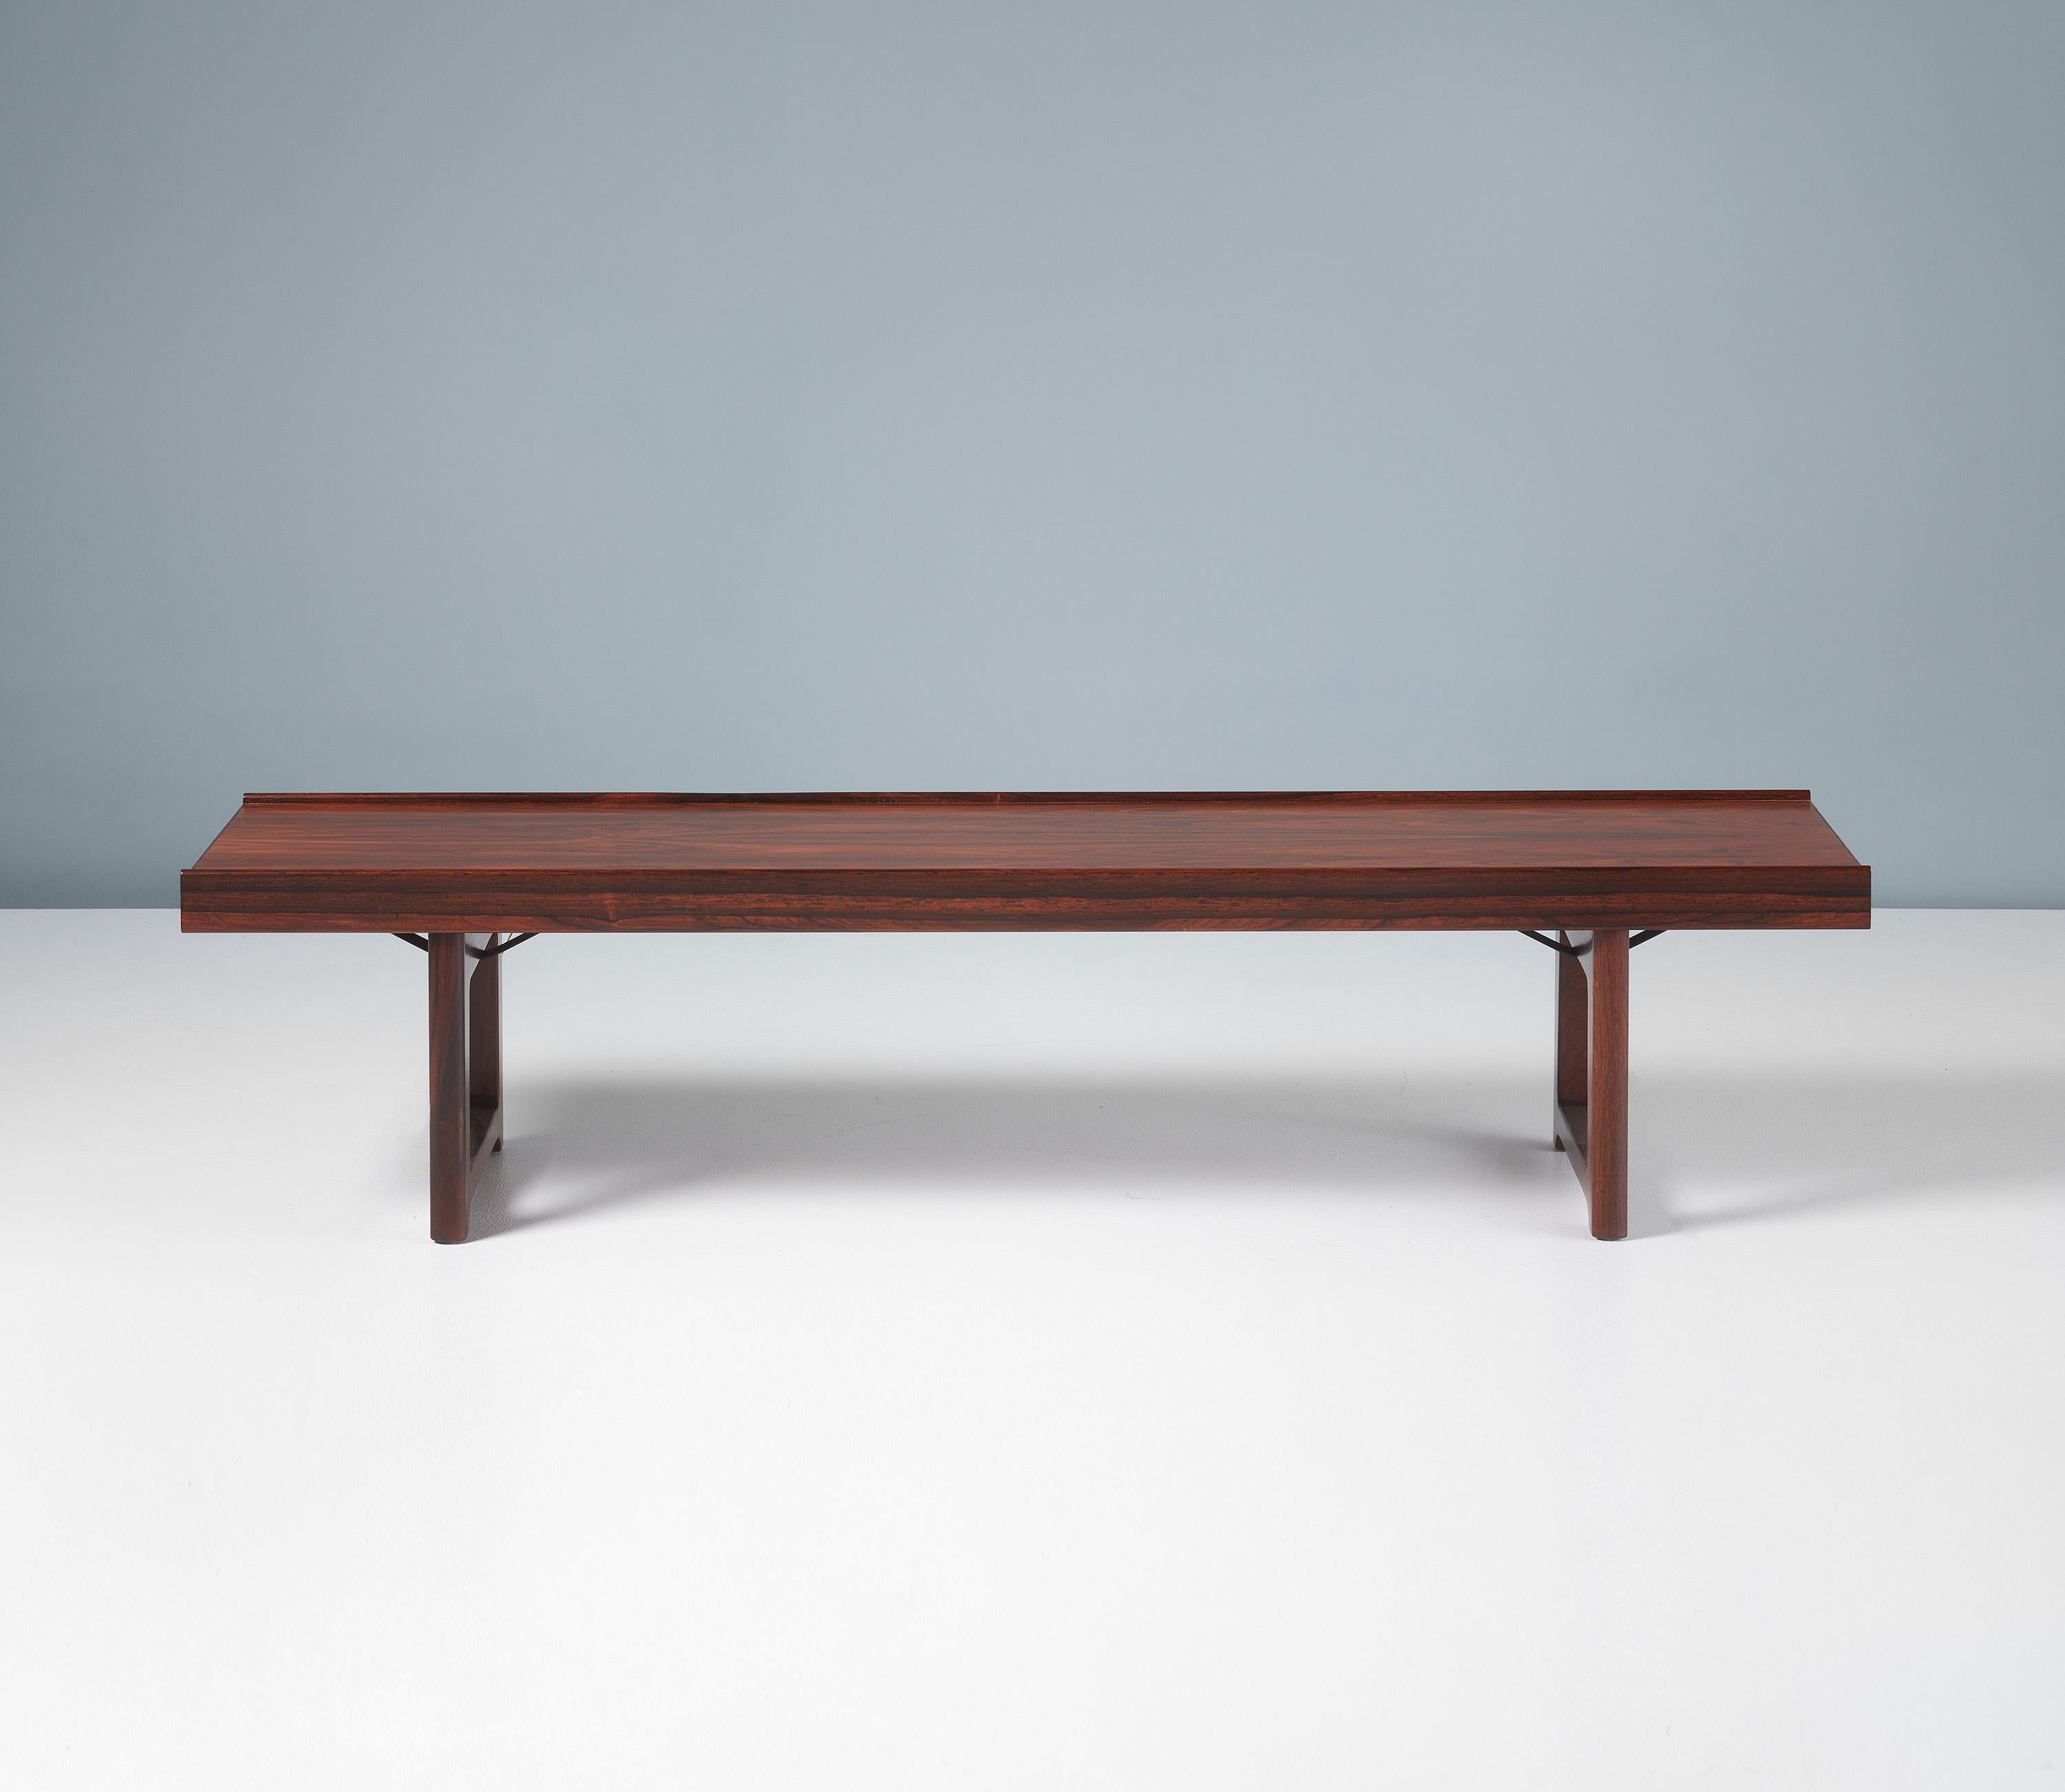 Torbjørn Afdal - 1.5m Krobo Bench, c1960

Iconic midcentury design from Norway. Torbjorn Afdal's Krobo bench, circa 1960 was designed as a multipurpose bench for producer Bruksbo and can also be used as a low coffee table. This example comes in